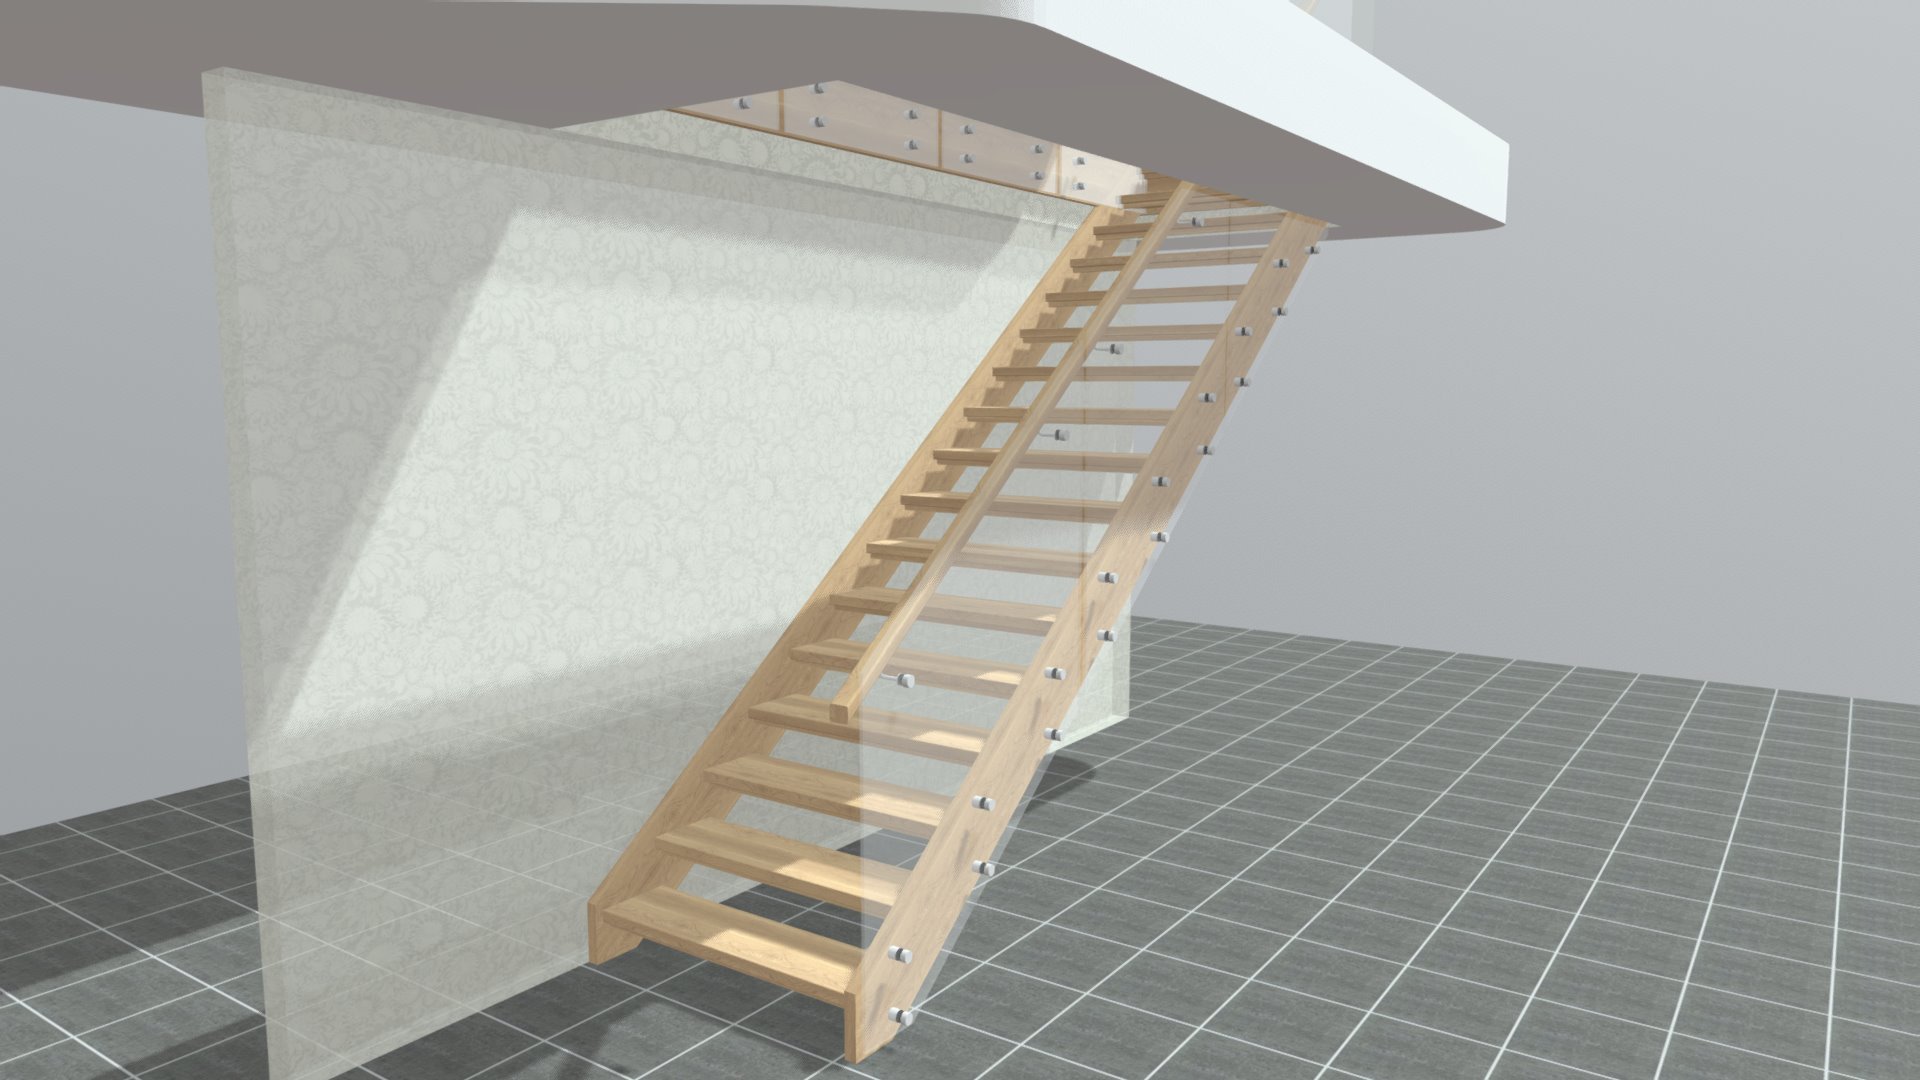 Open stair with Glass Void balustrade - 3D model by staircom [658bc93 ...